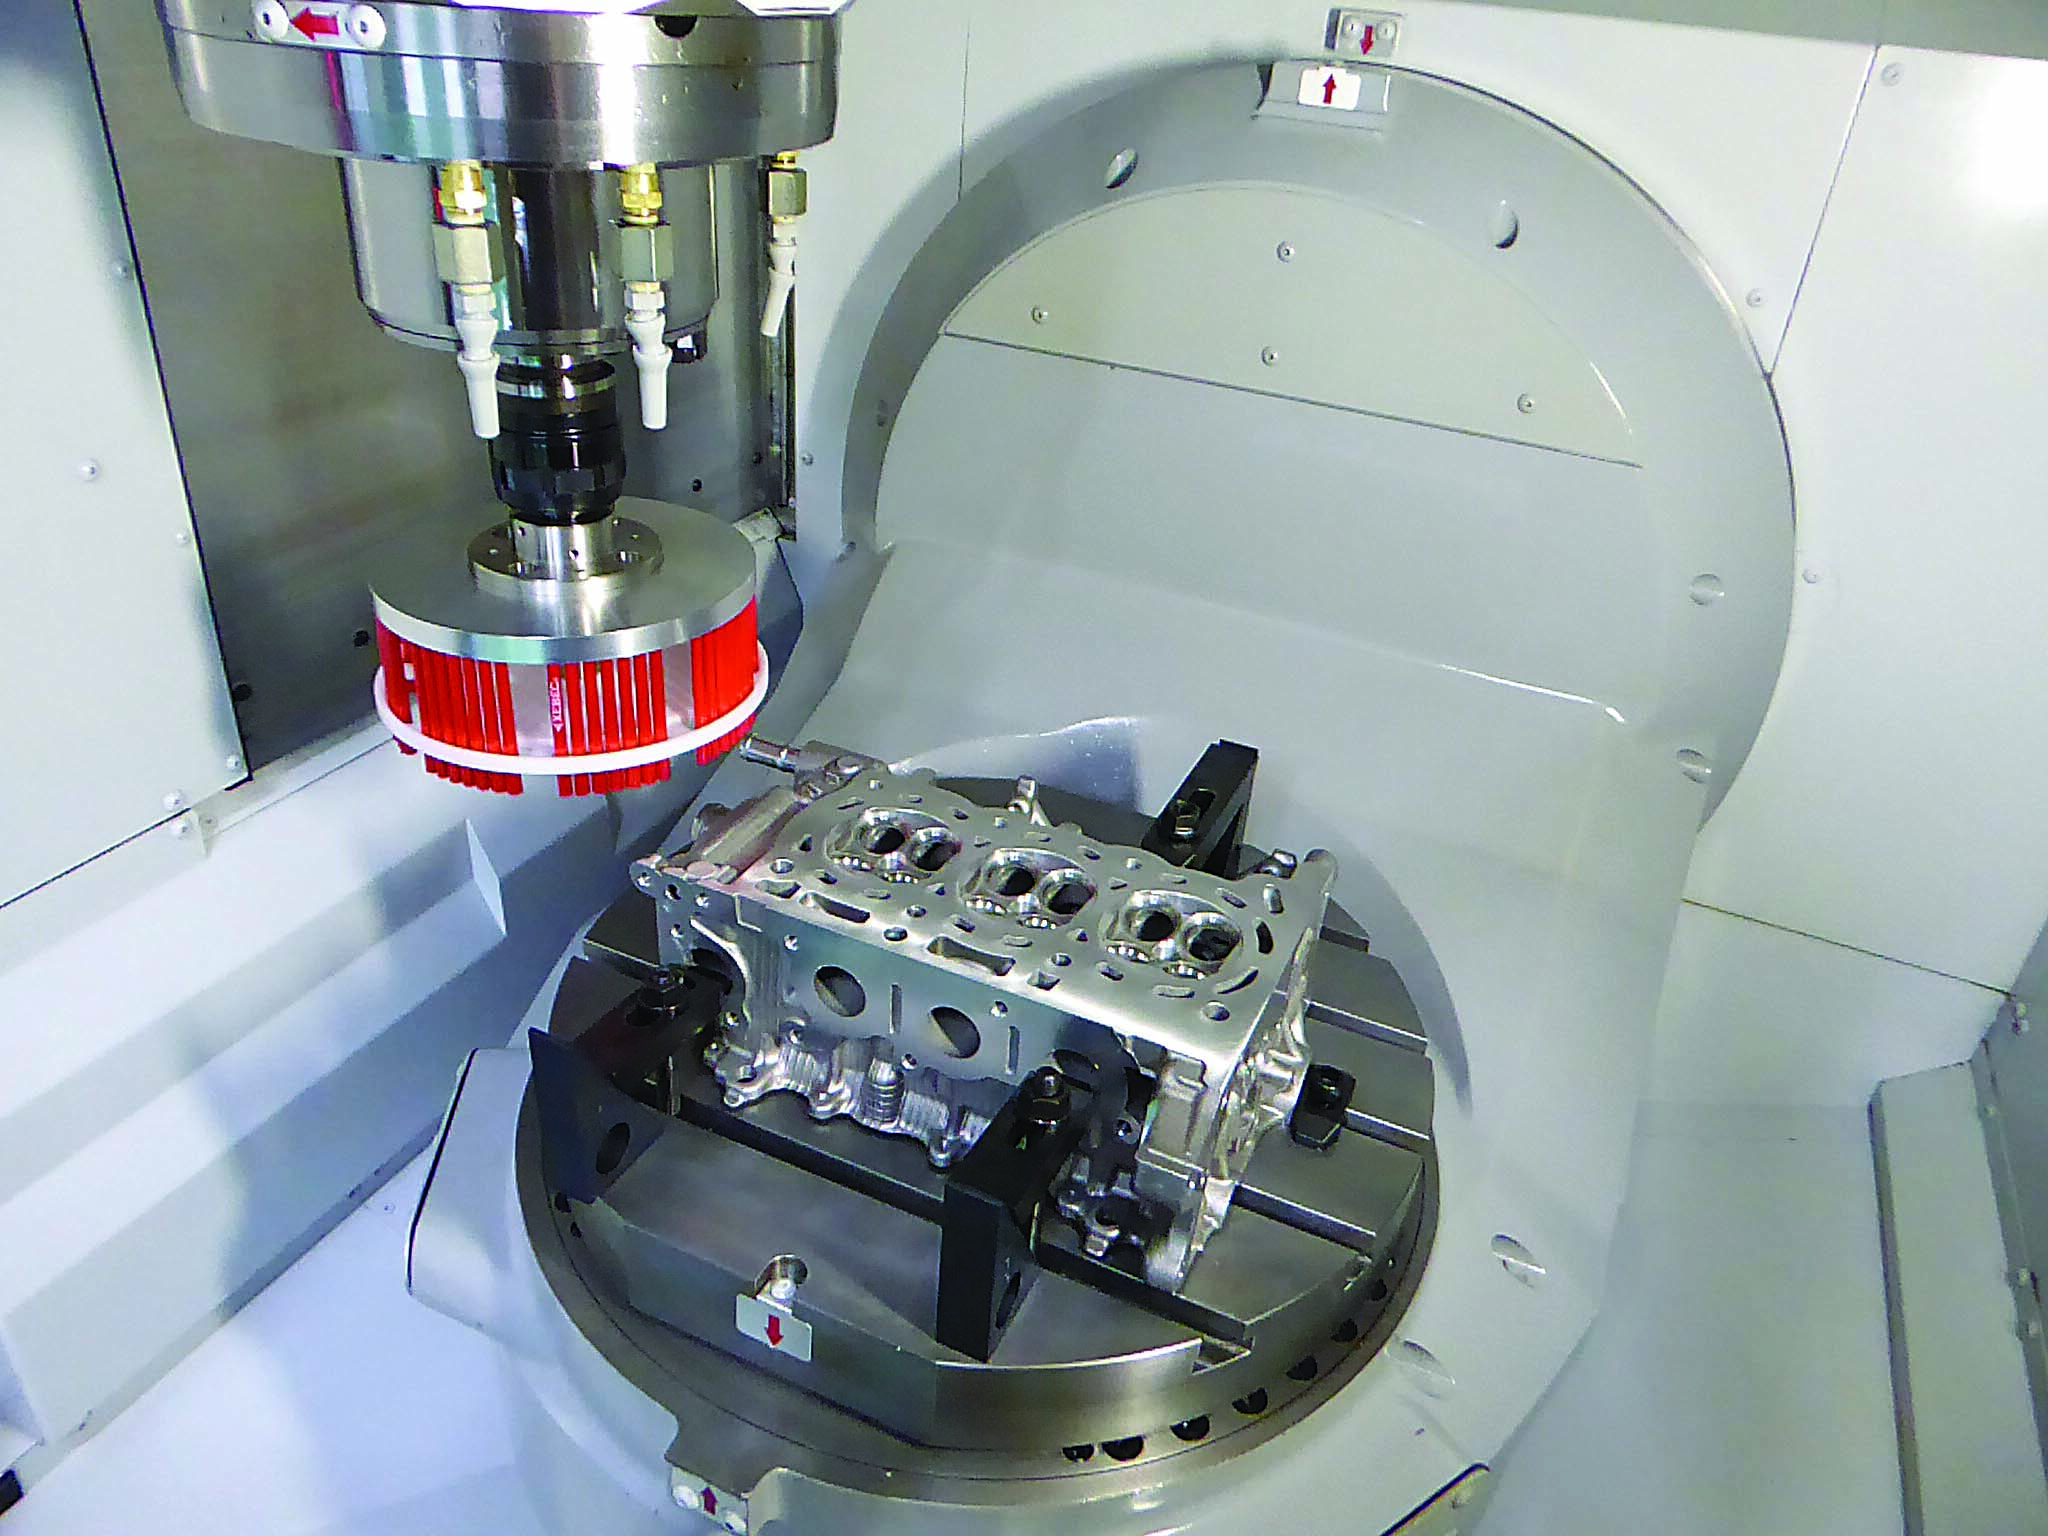 Automated surface deburring and finishing are performed on an engine block in a CNC using a ceramic fiber brush.